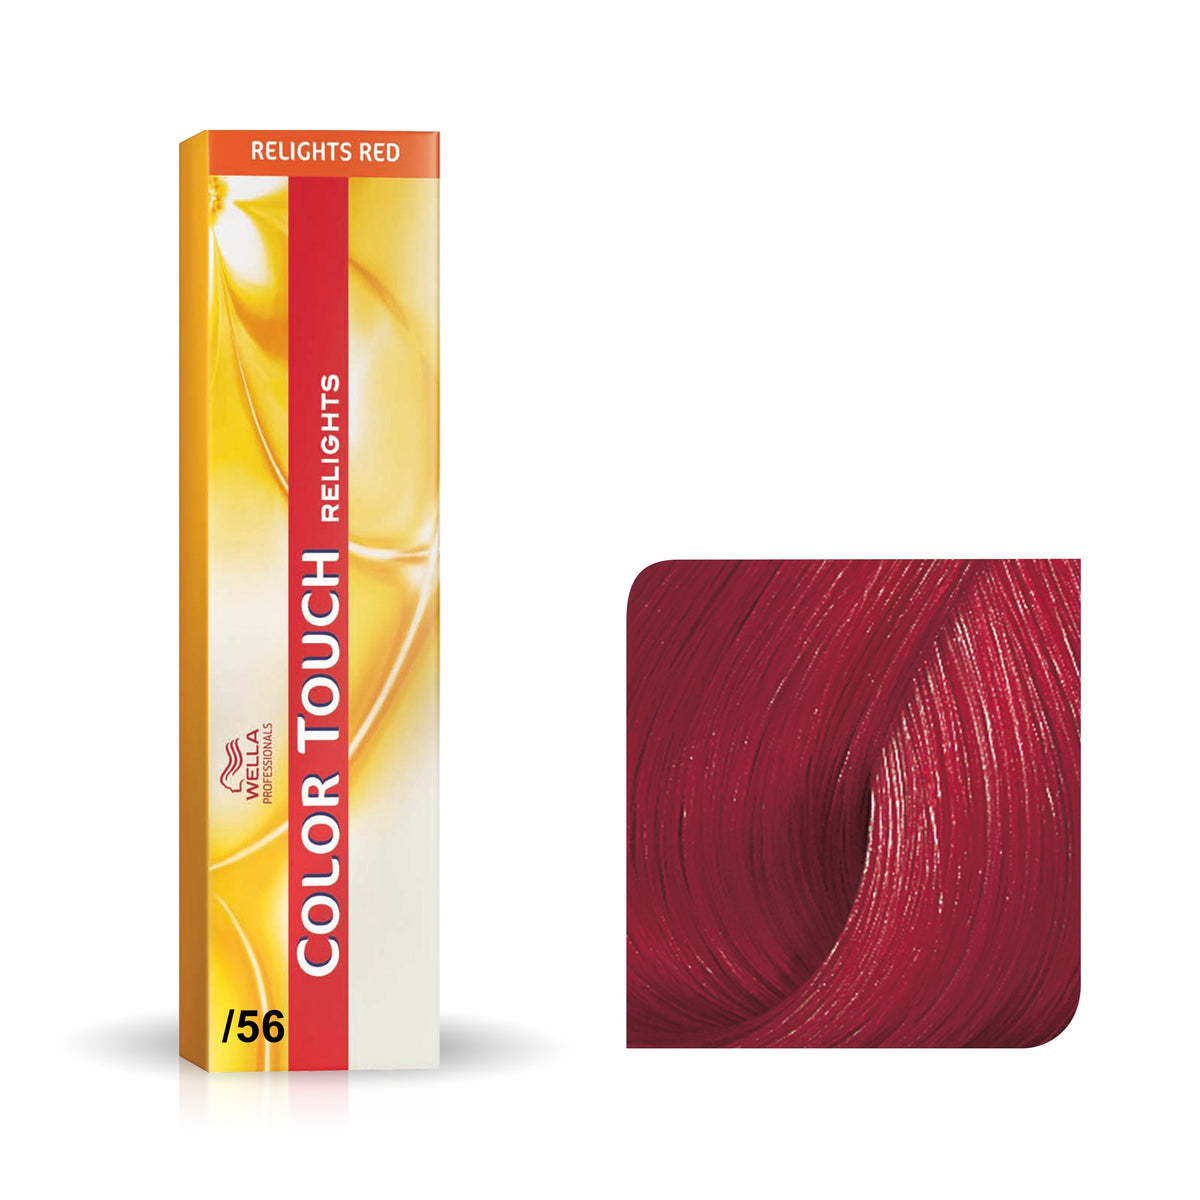 a tube of red hair color next to a box